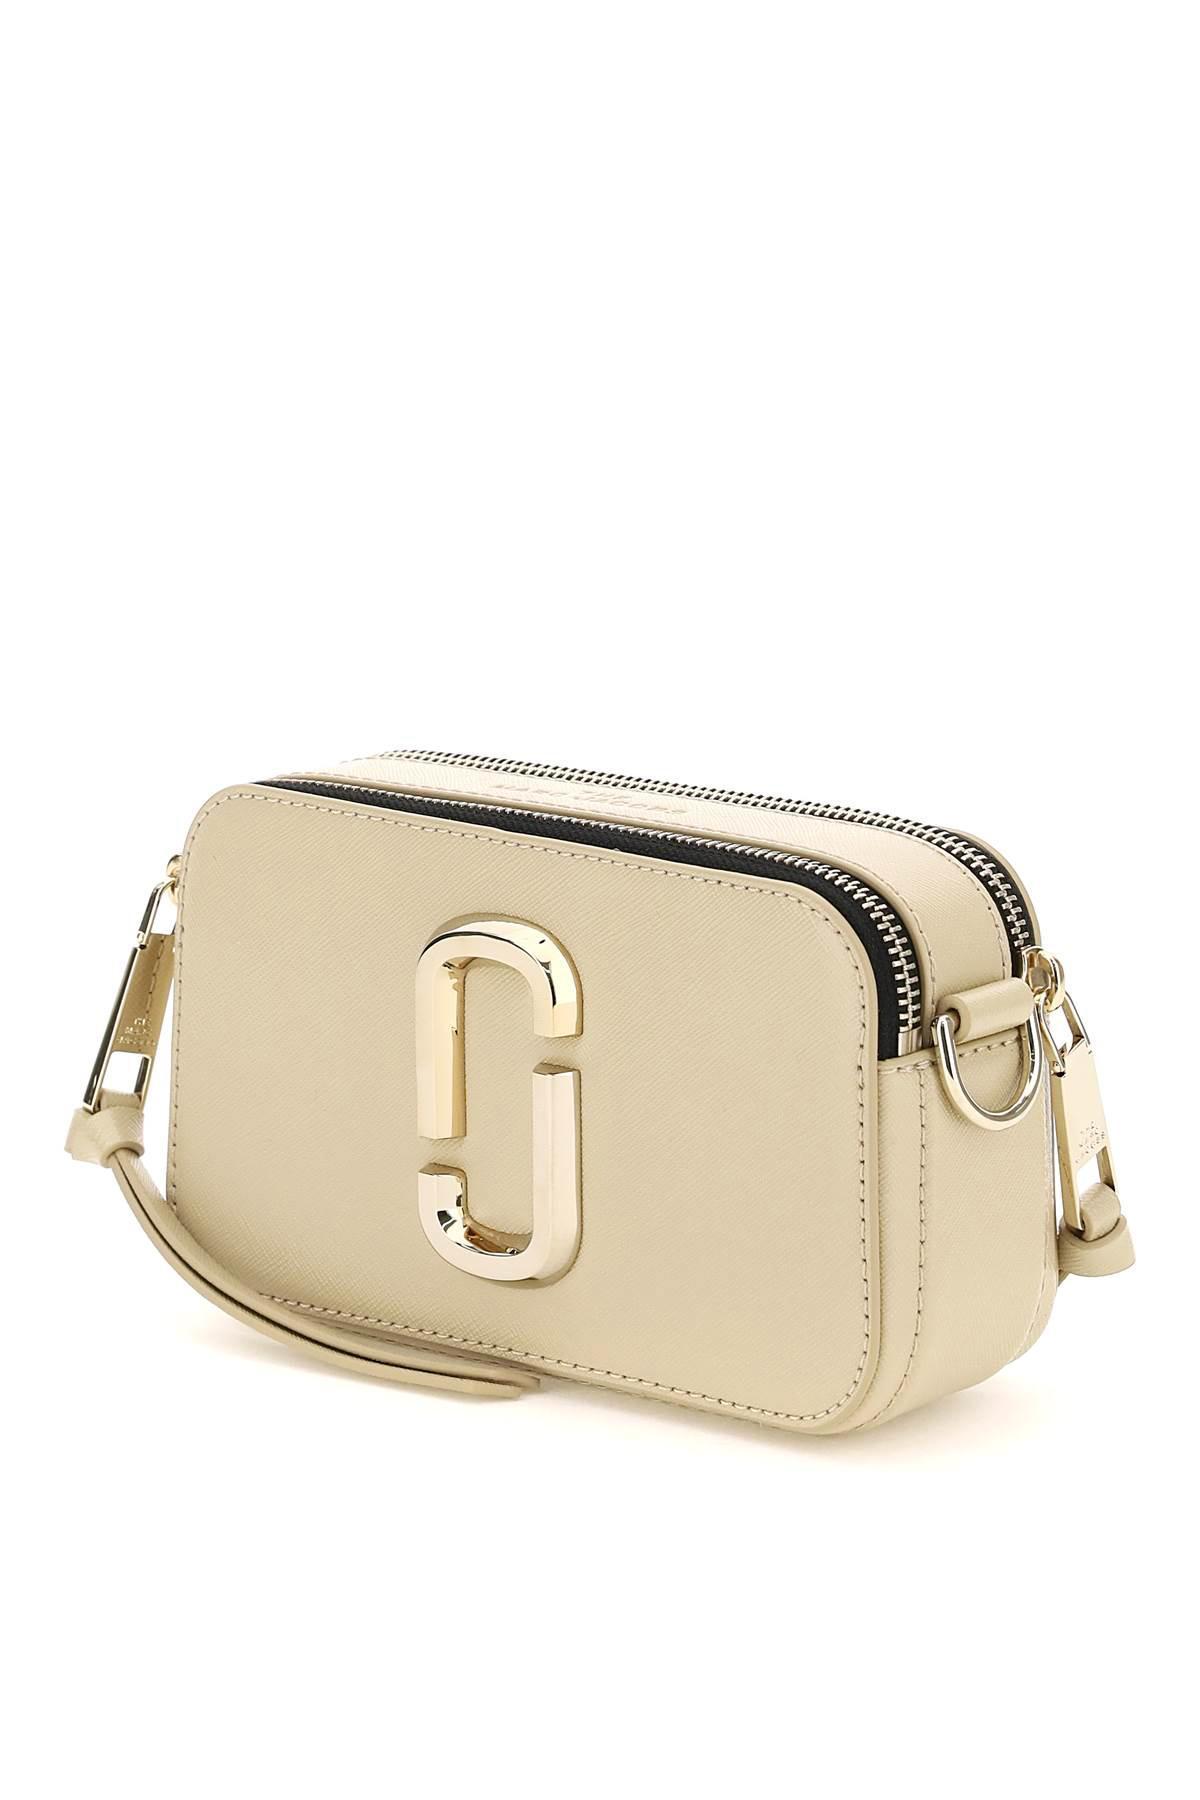 Marc Jacobs The Snapshot Small Camera Bag in Natural